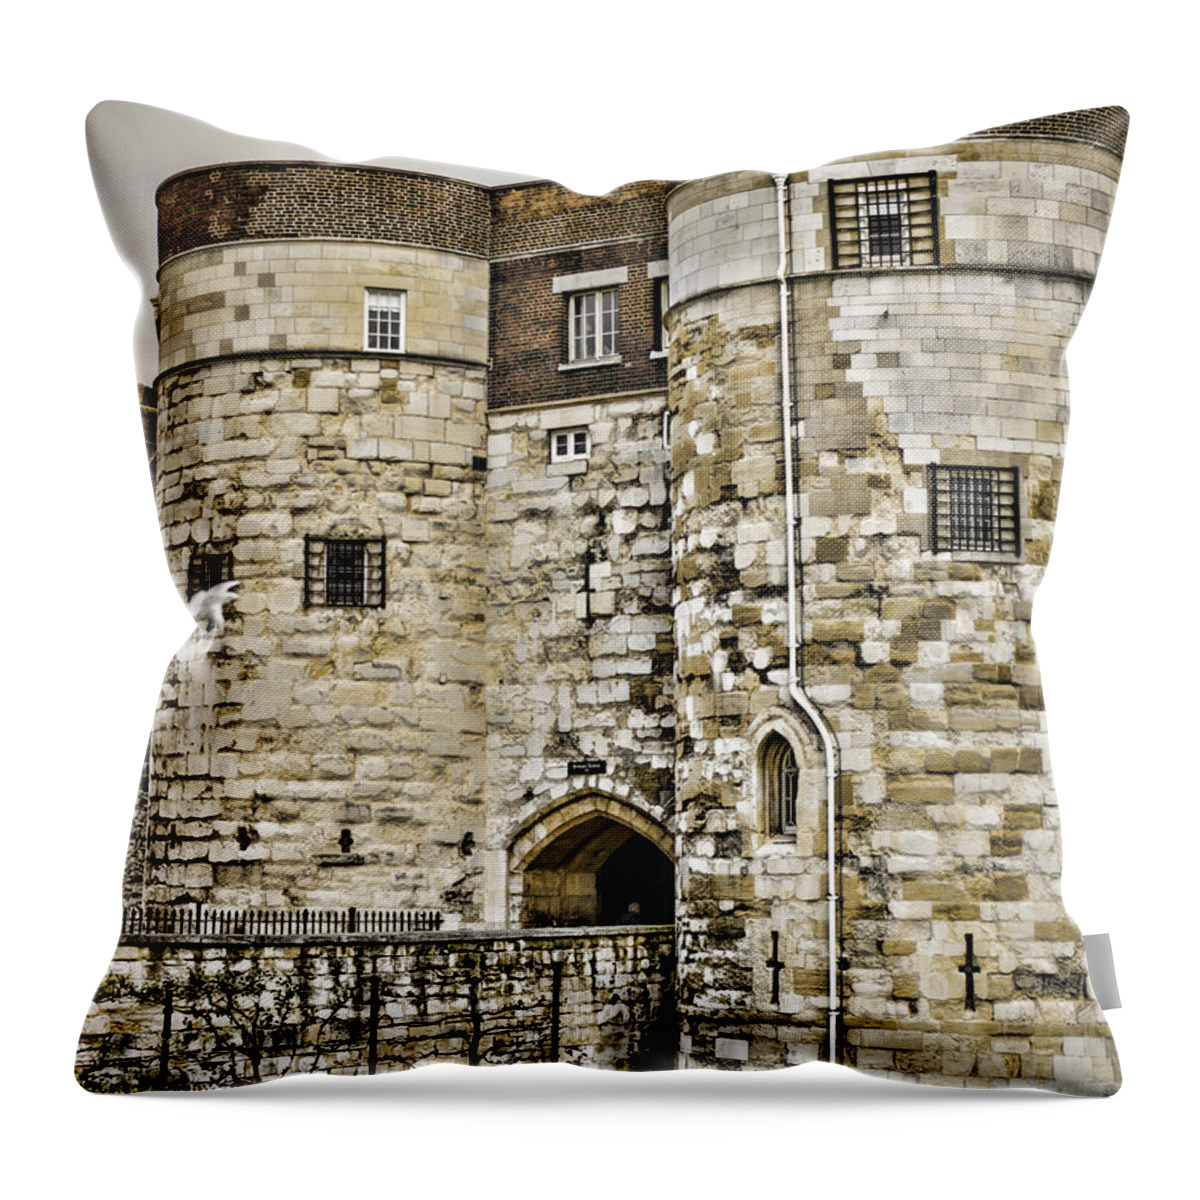 Byward Tower Throw Pillow featuring the photograph Byward Tower by Heather Applegate